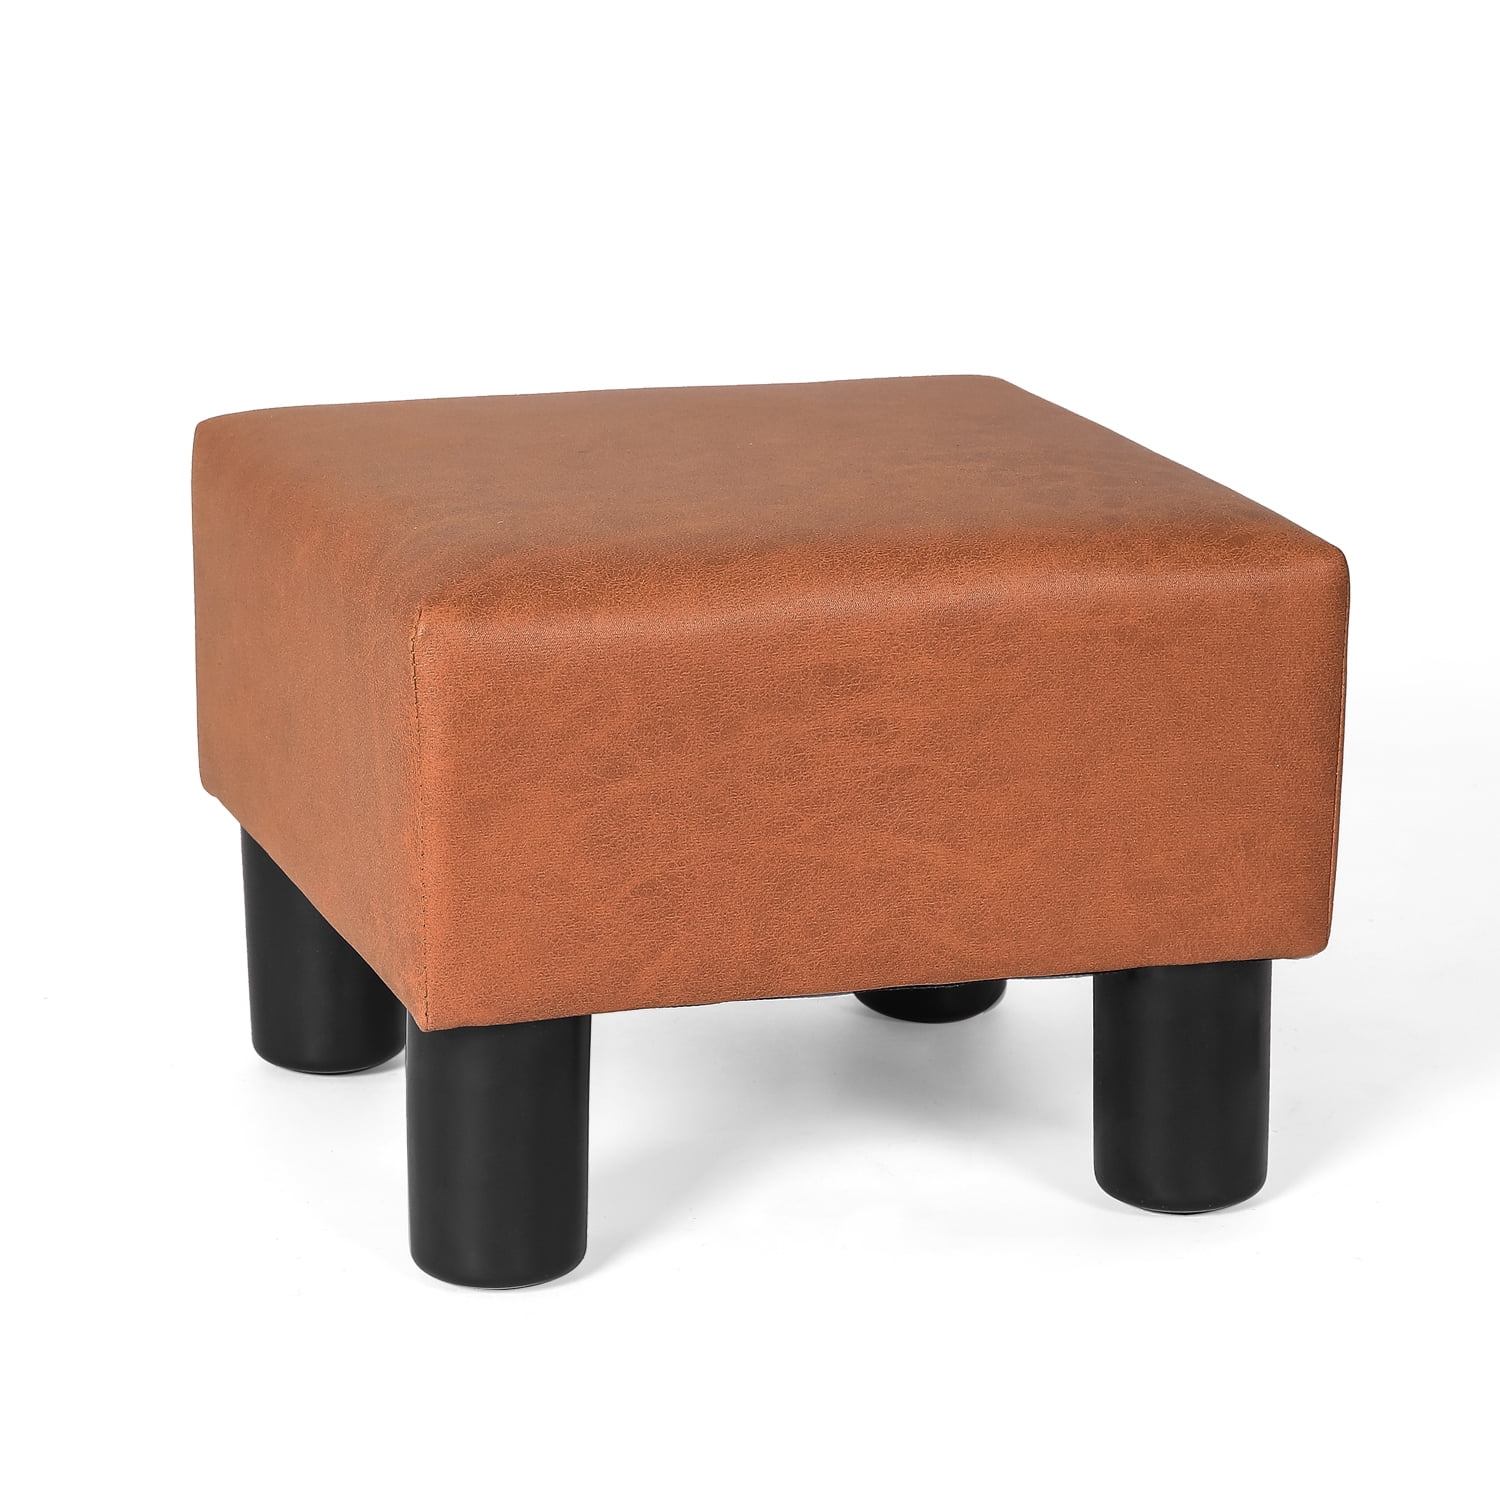 Small Rectangle Foot Stool, Leather Footrest Ottoman With Non-skid